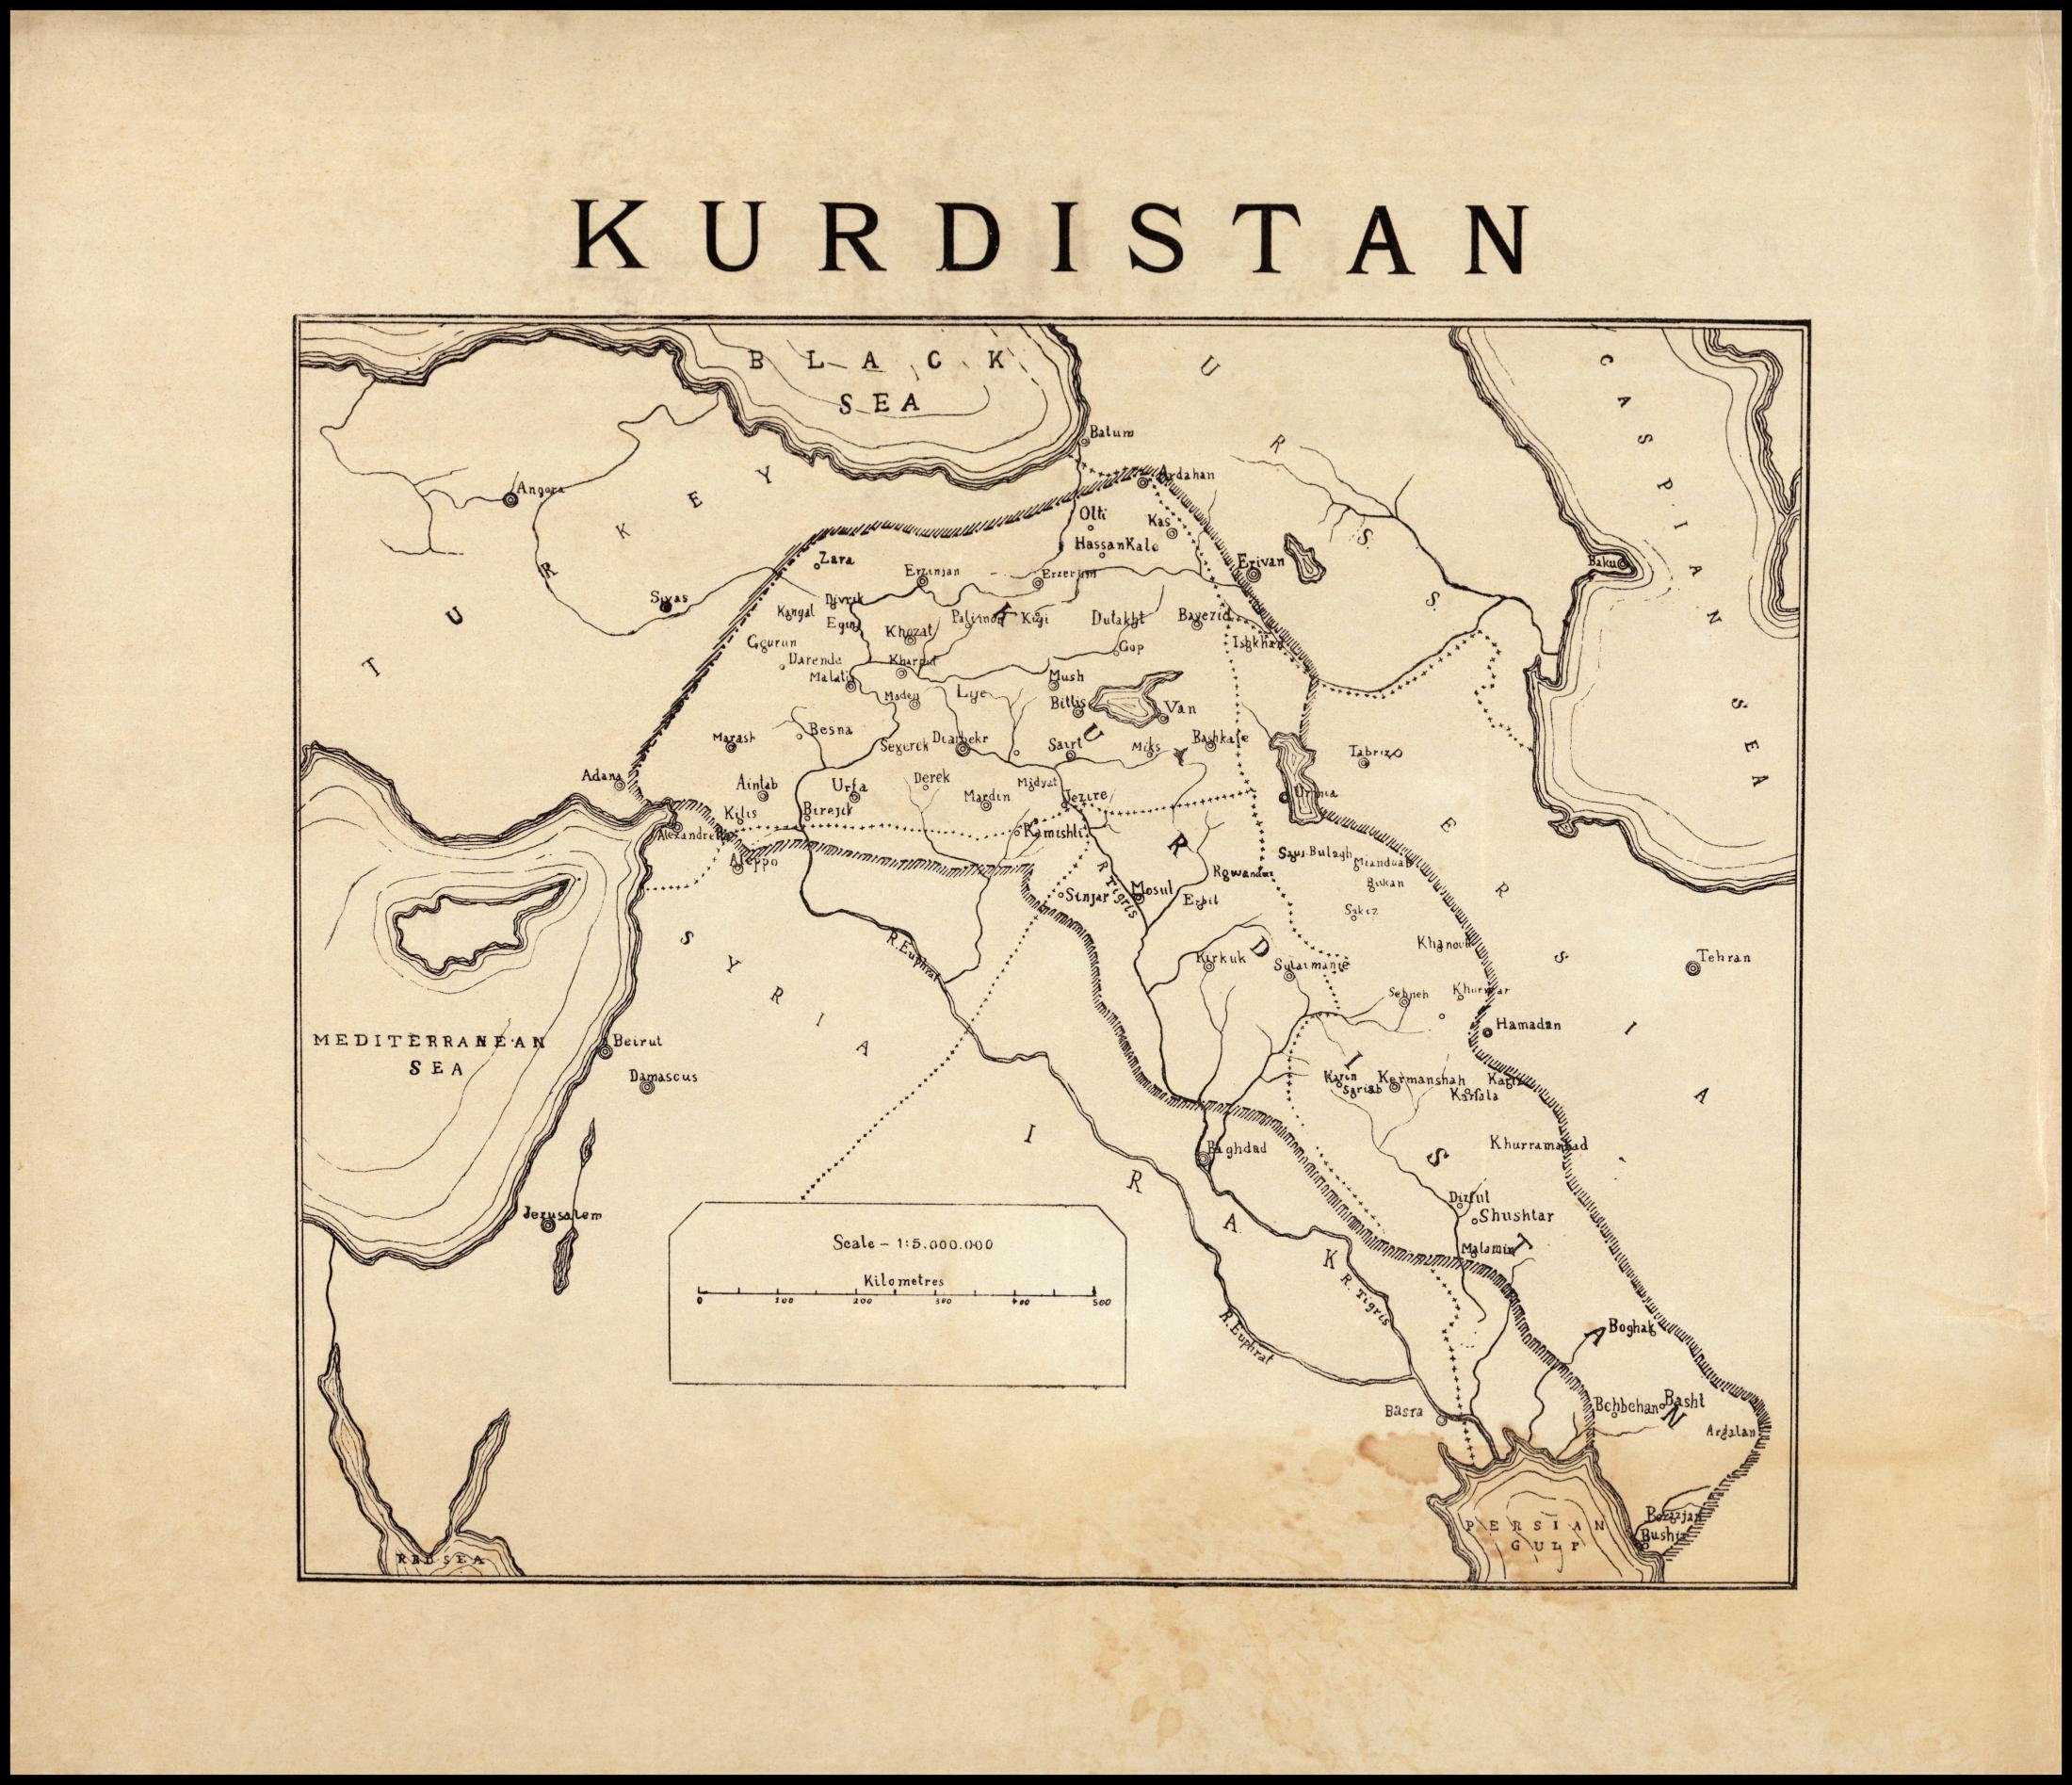 Map presented by the Kurdish League Khoybun to the San Francisco Conference on March 30, 1945